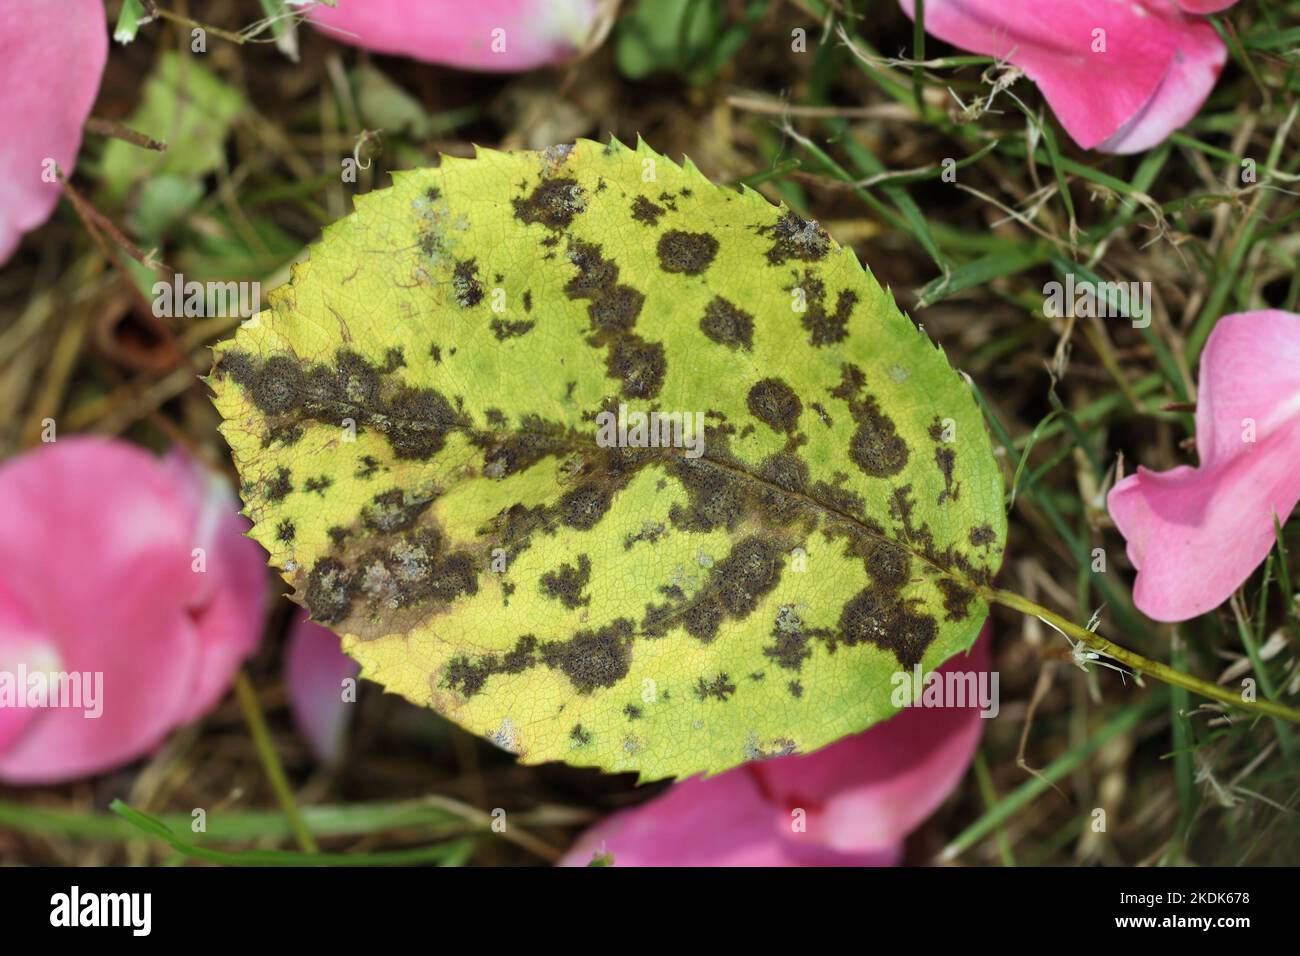 The rose black spot disease caused by the fungus Diplocarpon rosae. The black spots on the leaves are circular with a perforated edge. Close-up image Stock Photo